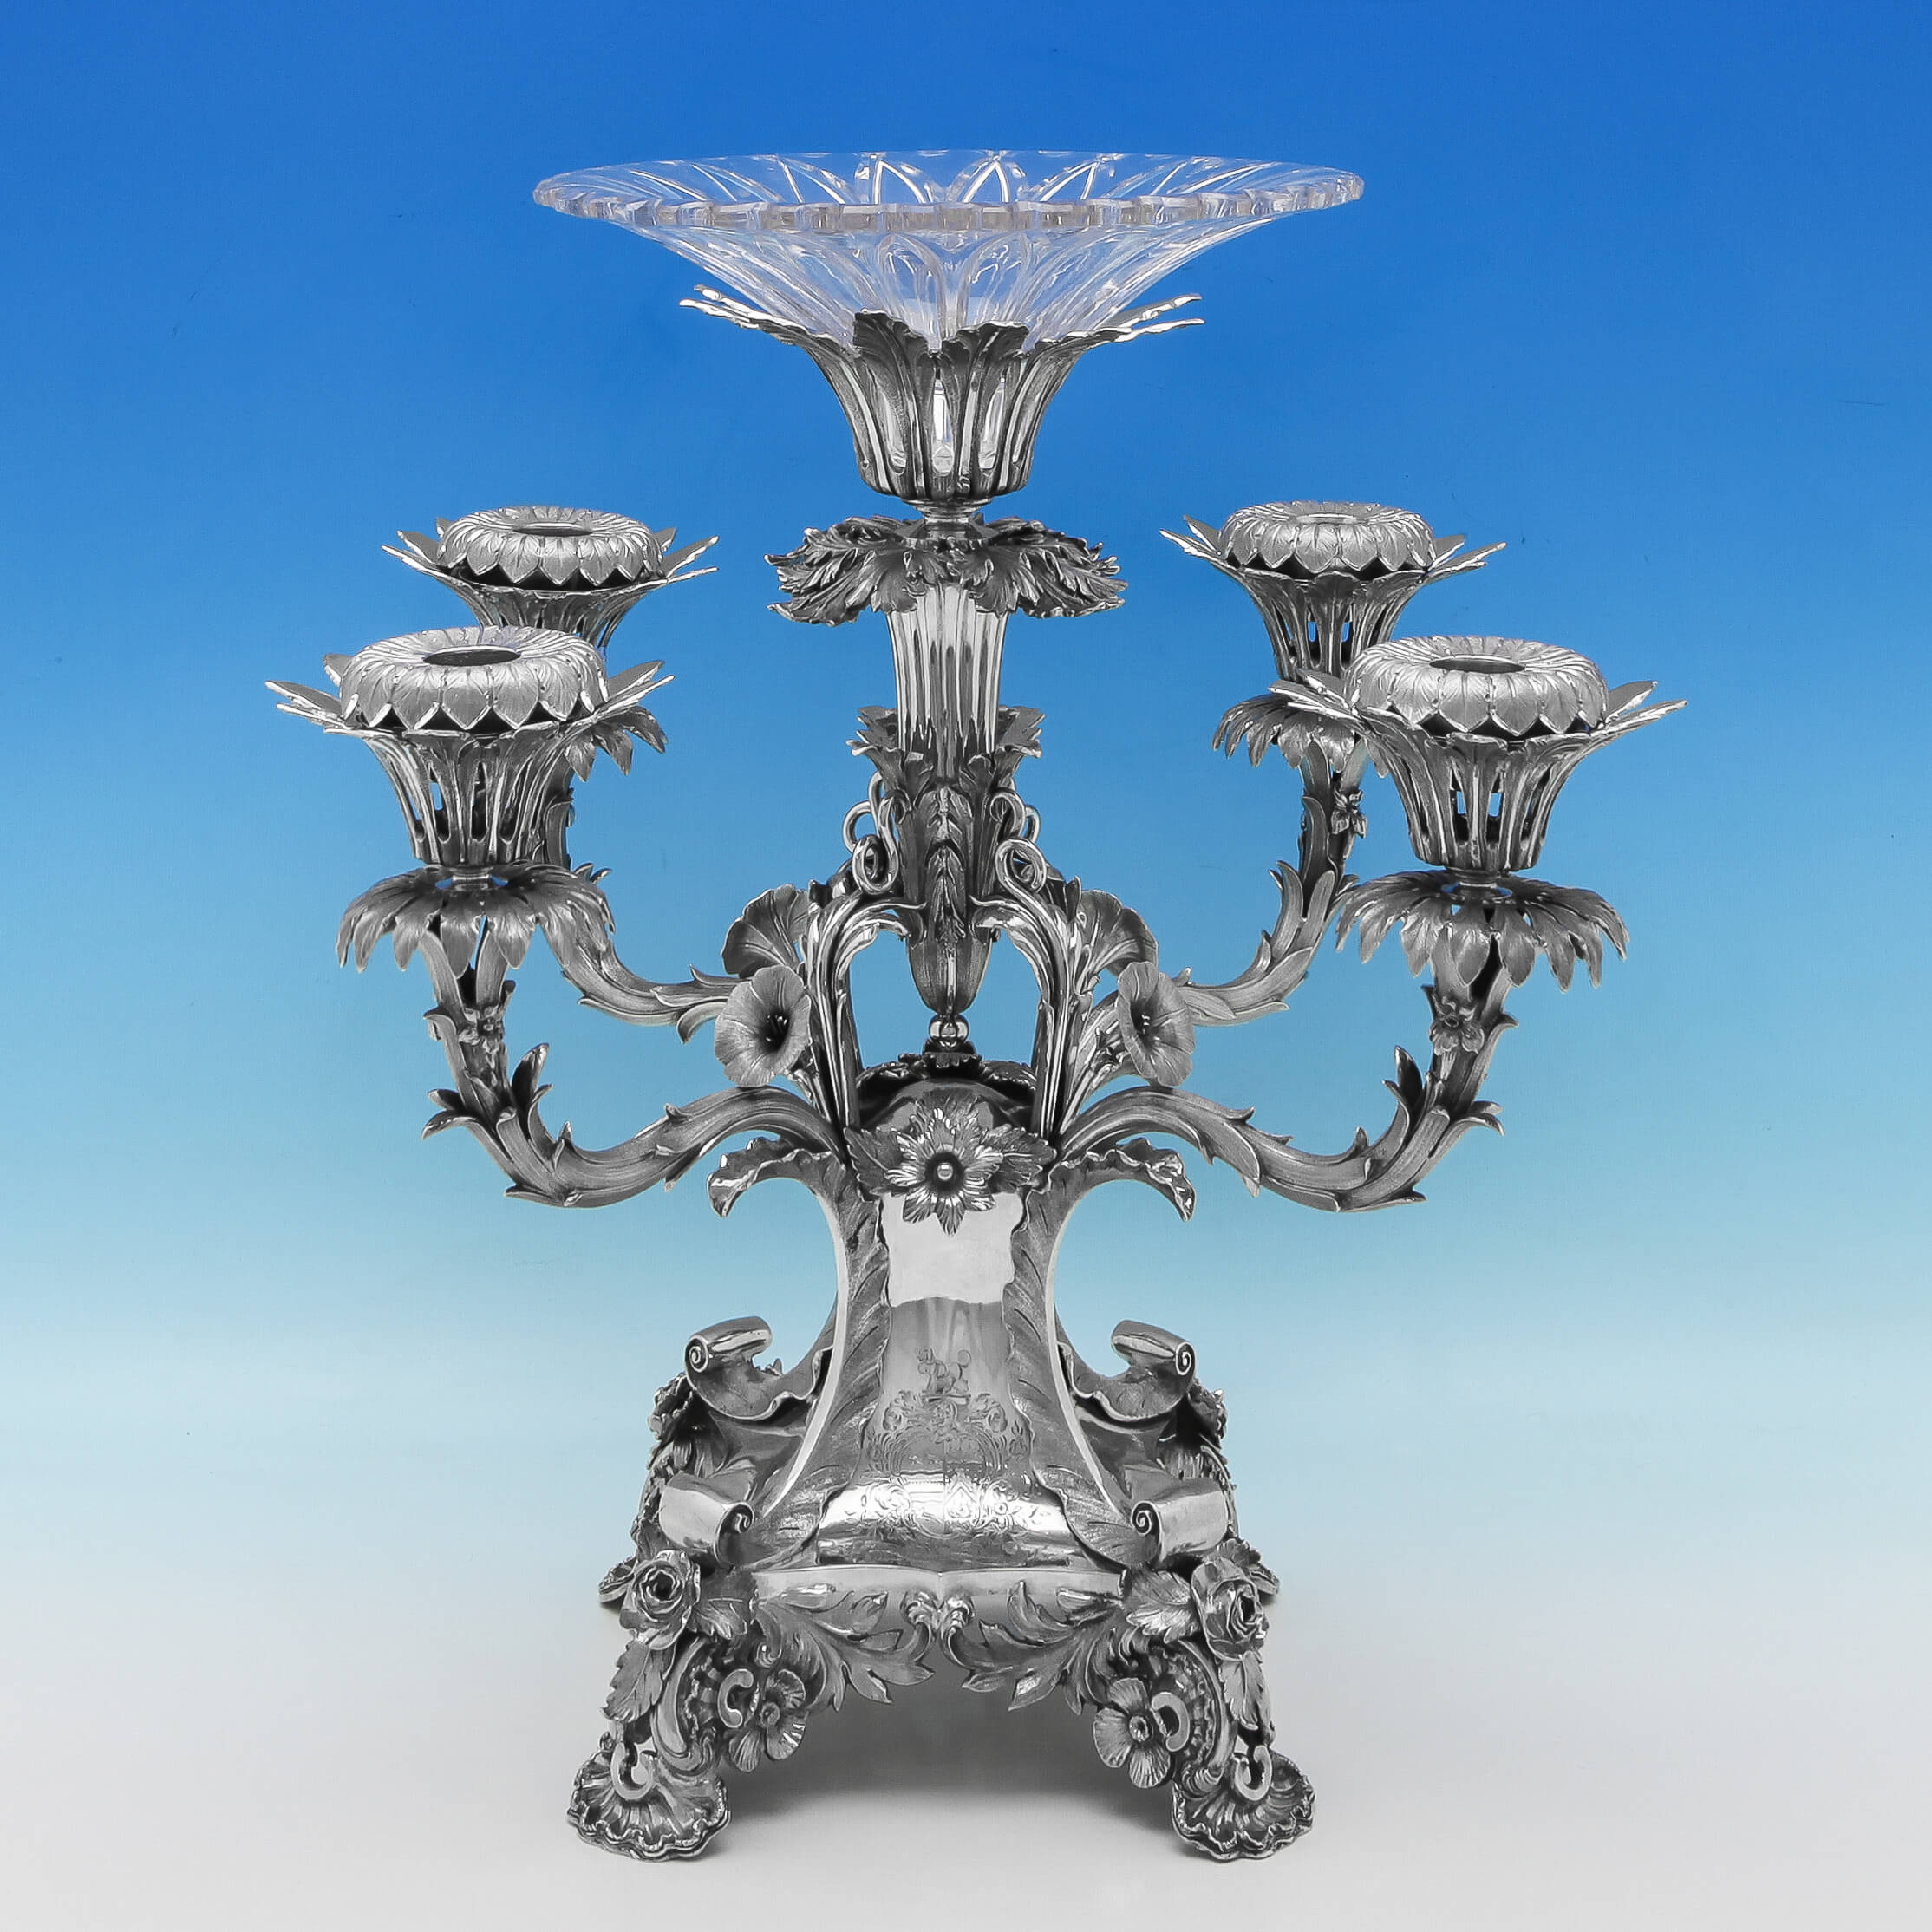 Incredible 19th century English Silver Centrepiece or Epergne - William IV 1834